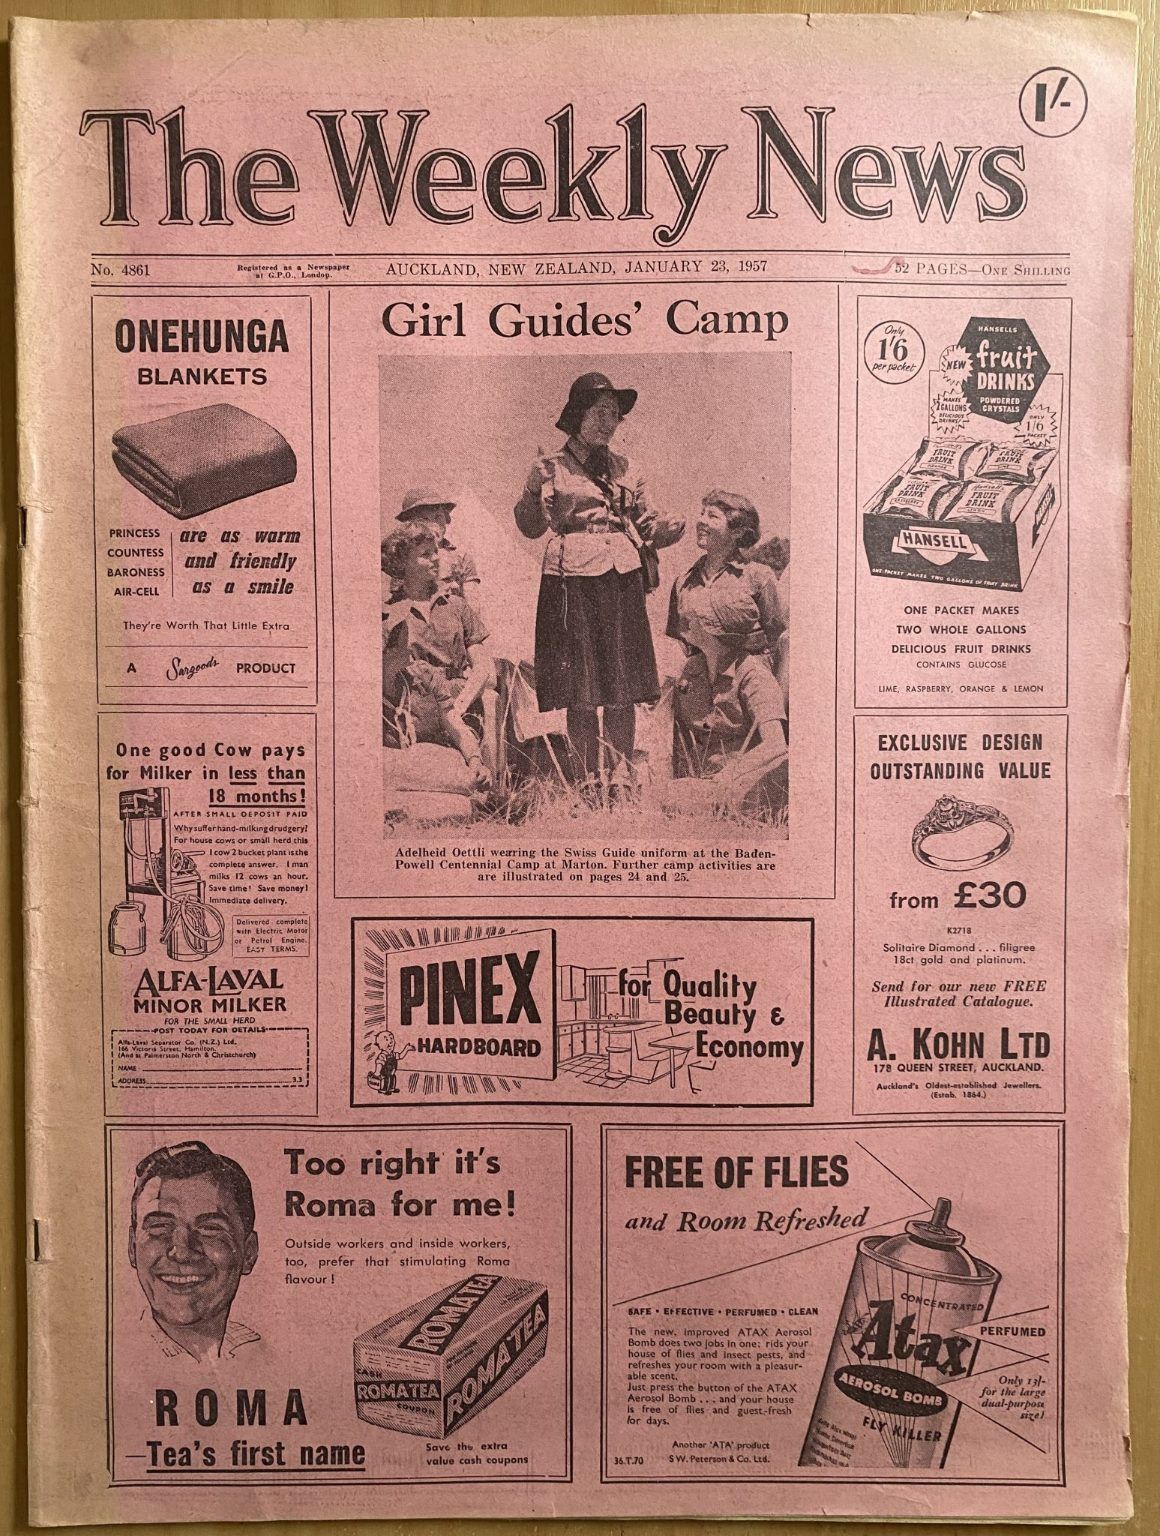 OLD NEWSPAPER: The Weekly News, No. 4861, 23 January 1957